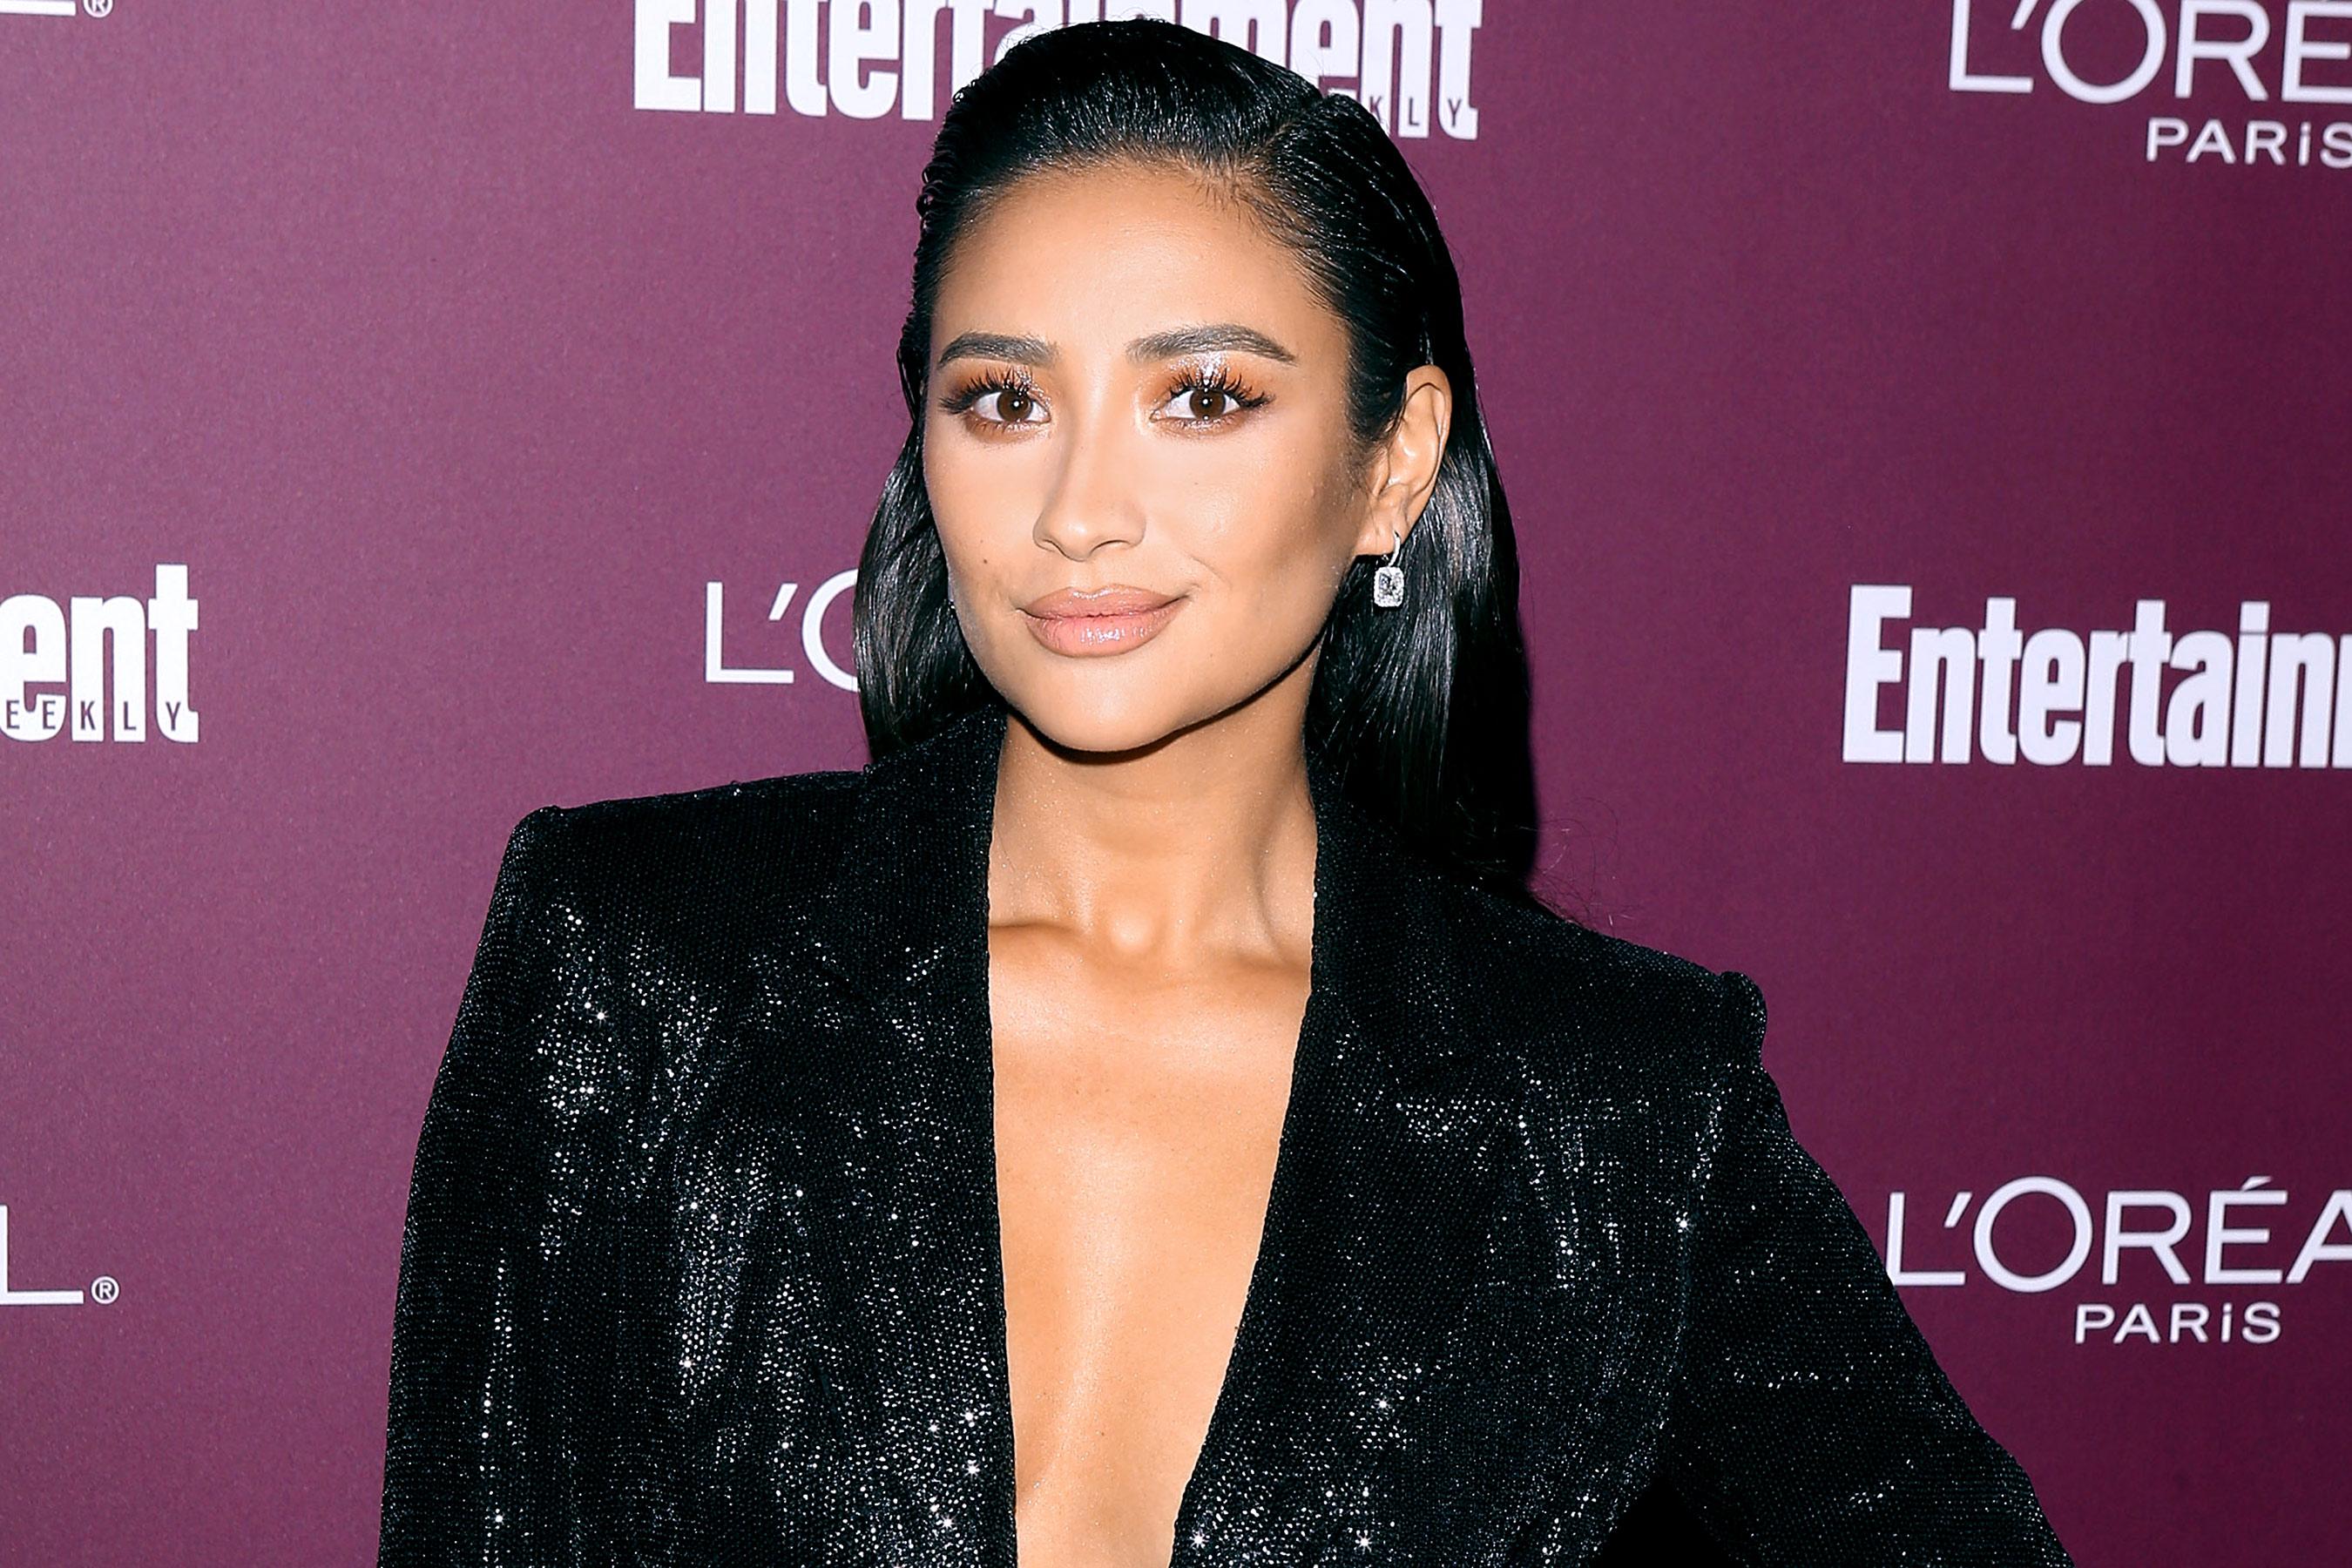 Pretty Little Liars spinoff: Shay Mitchell might appear in